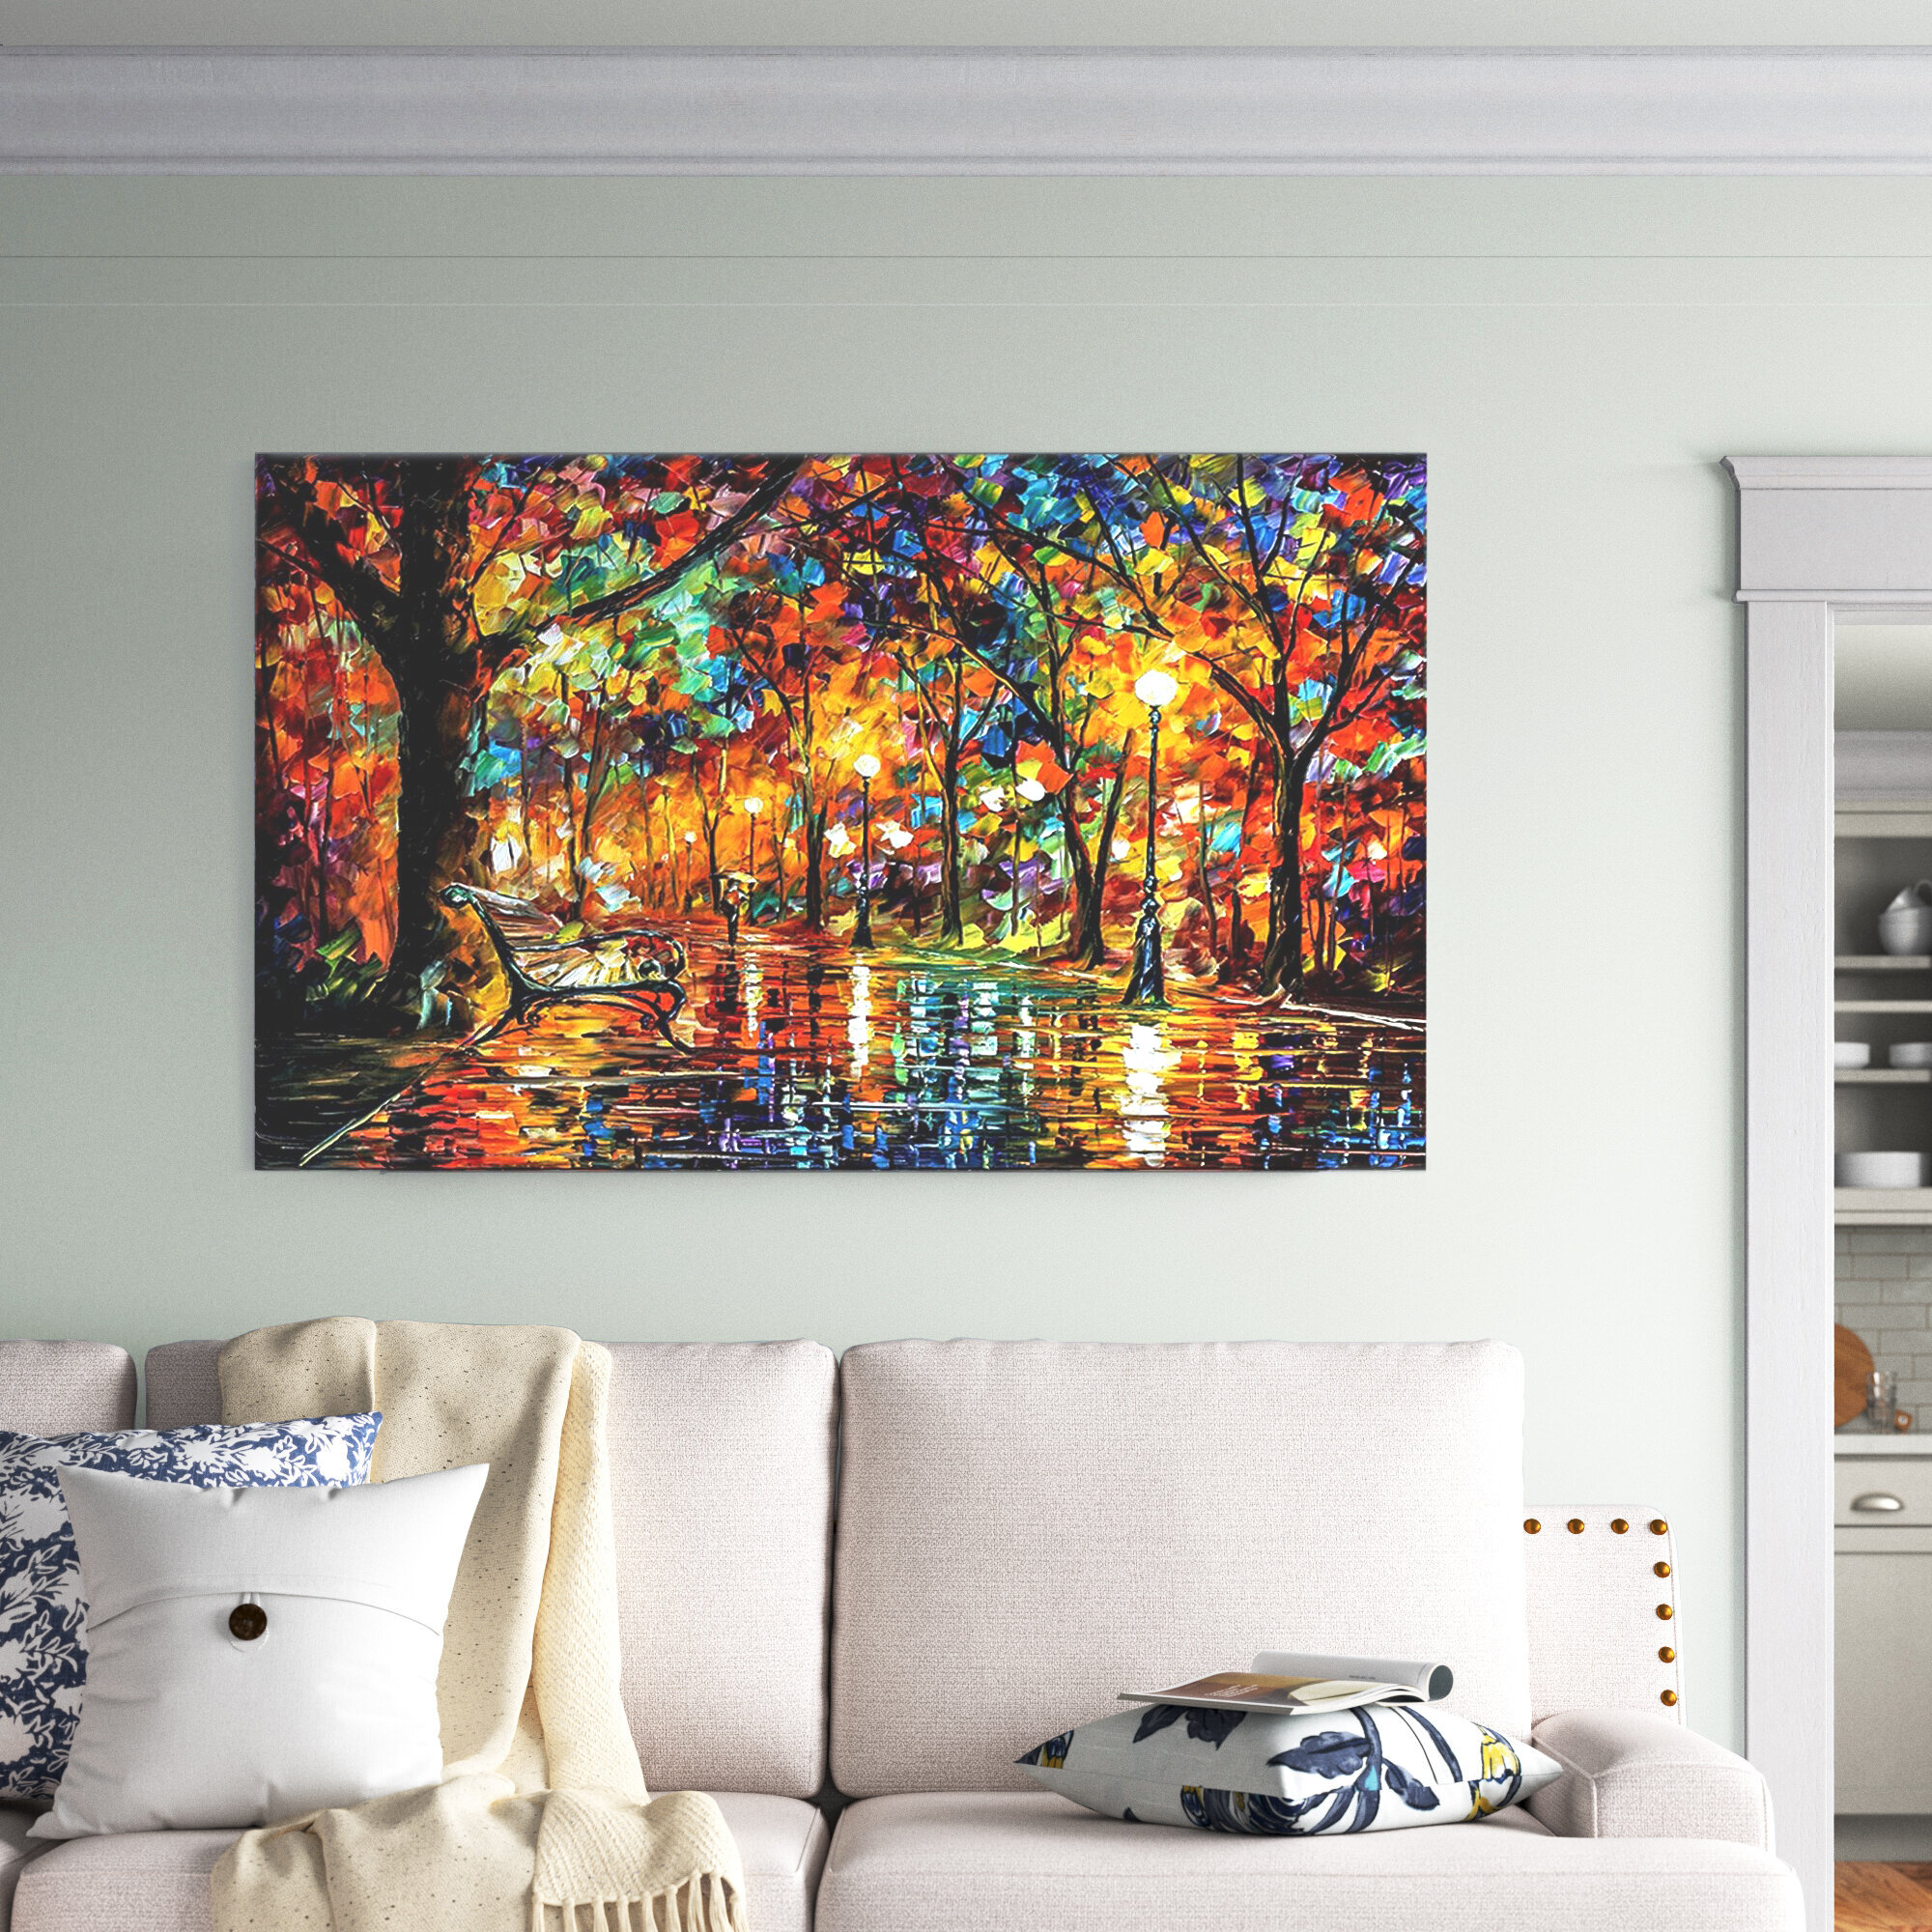 Original Abstract Canvas Art Large Oil Painting on Canvas Gift Idea Modern Wall Art Temple For Positive Vibe Home Decor Textured Art